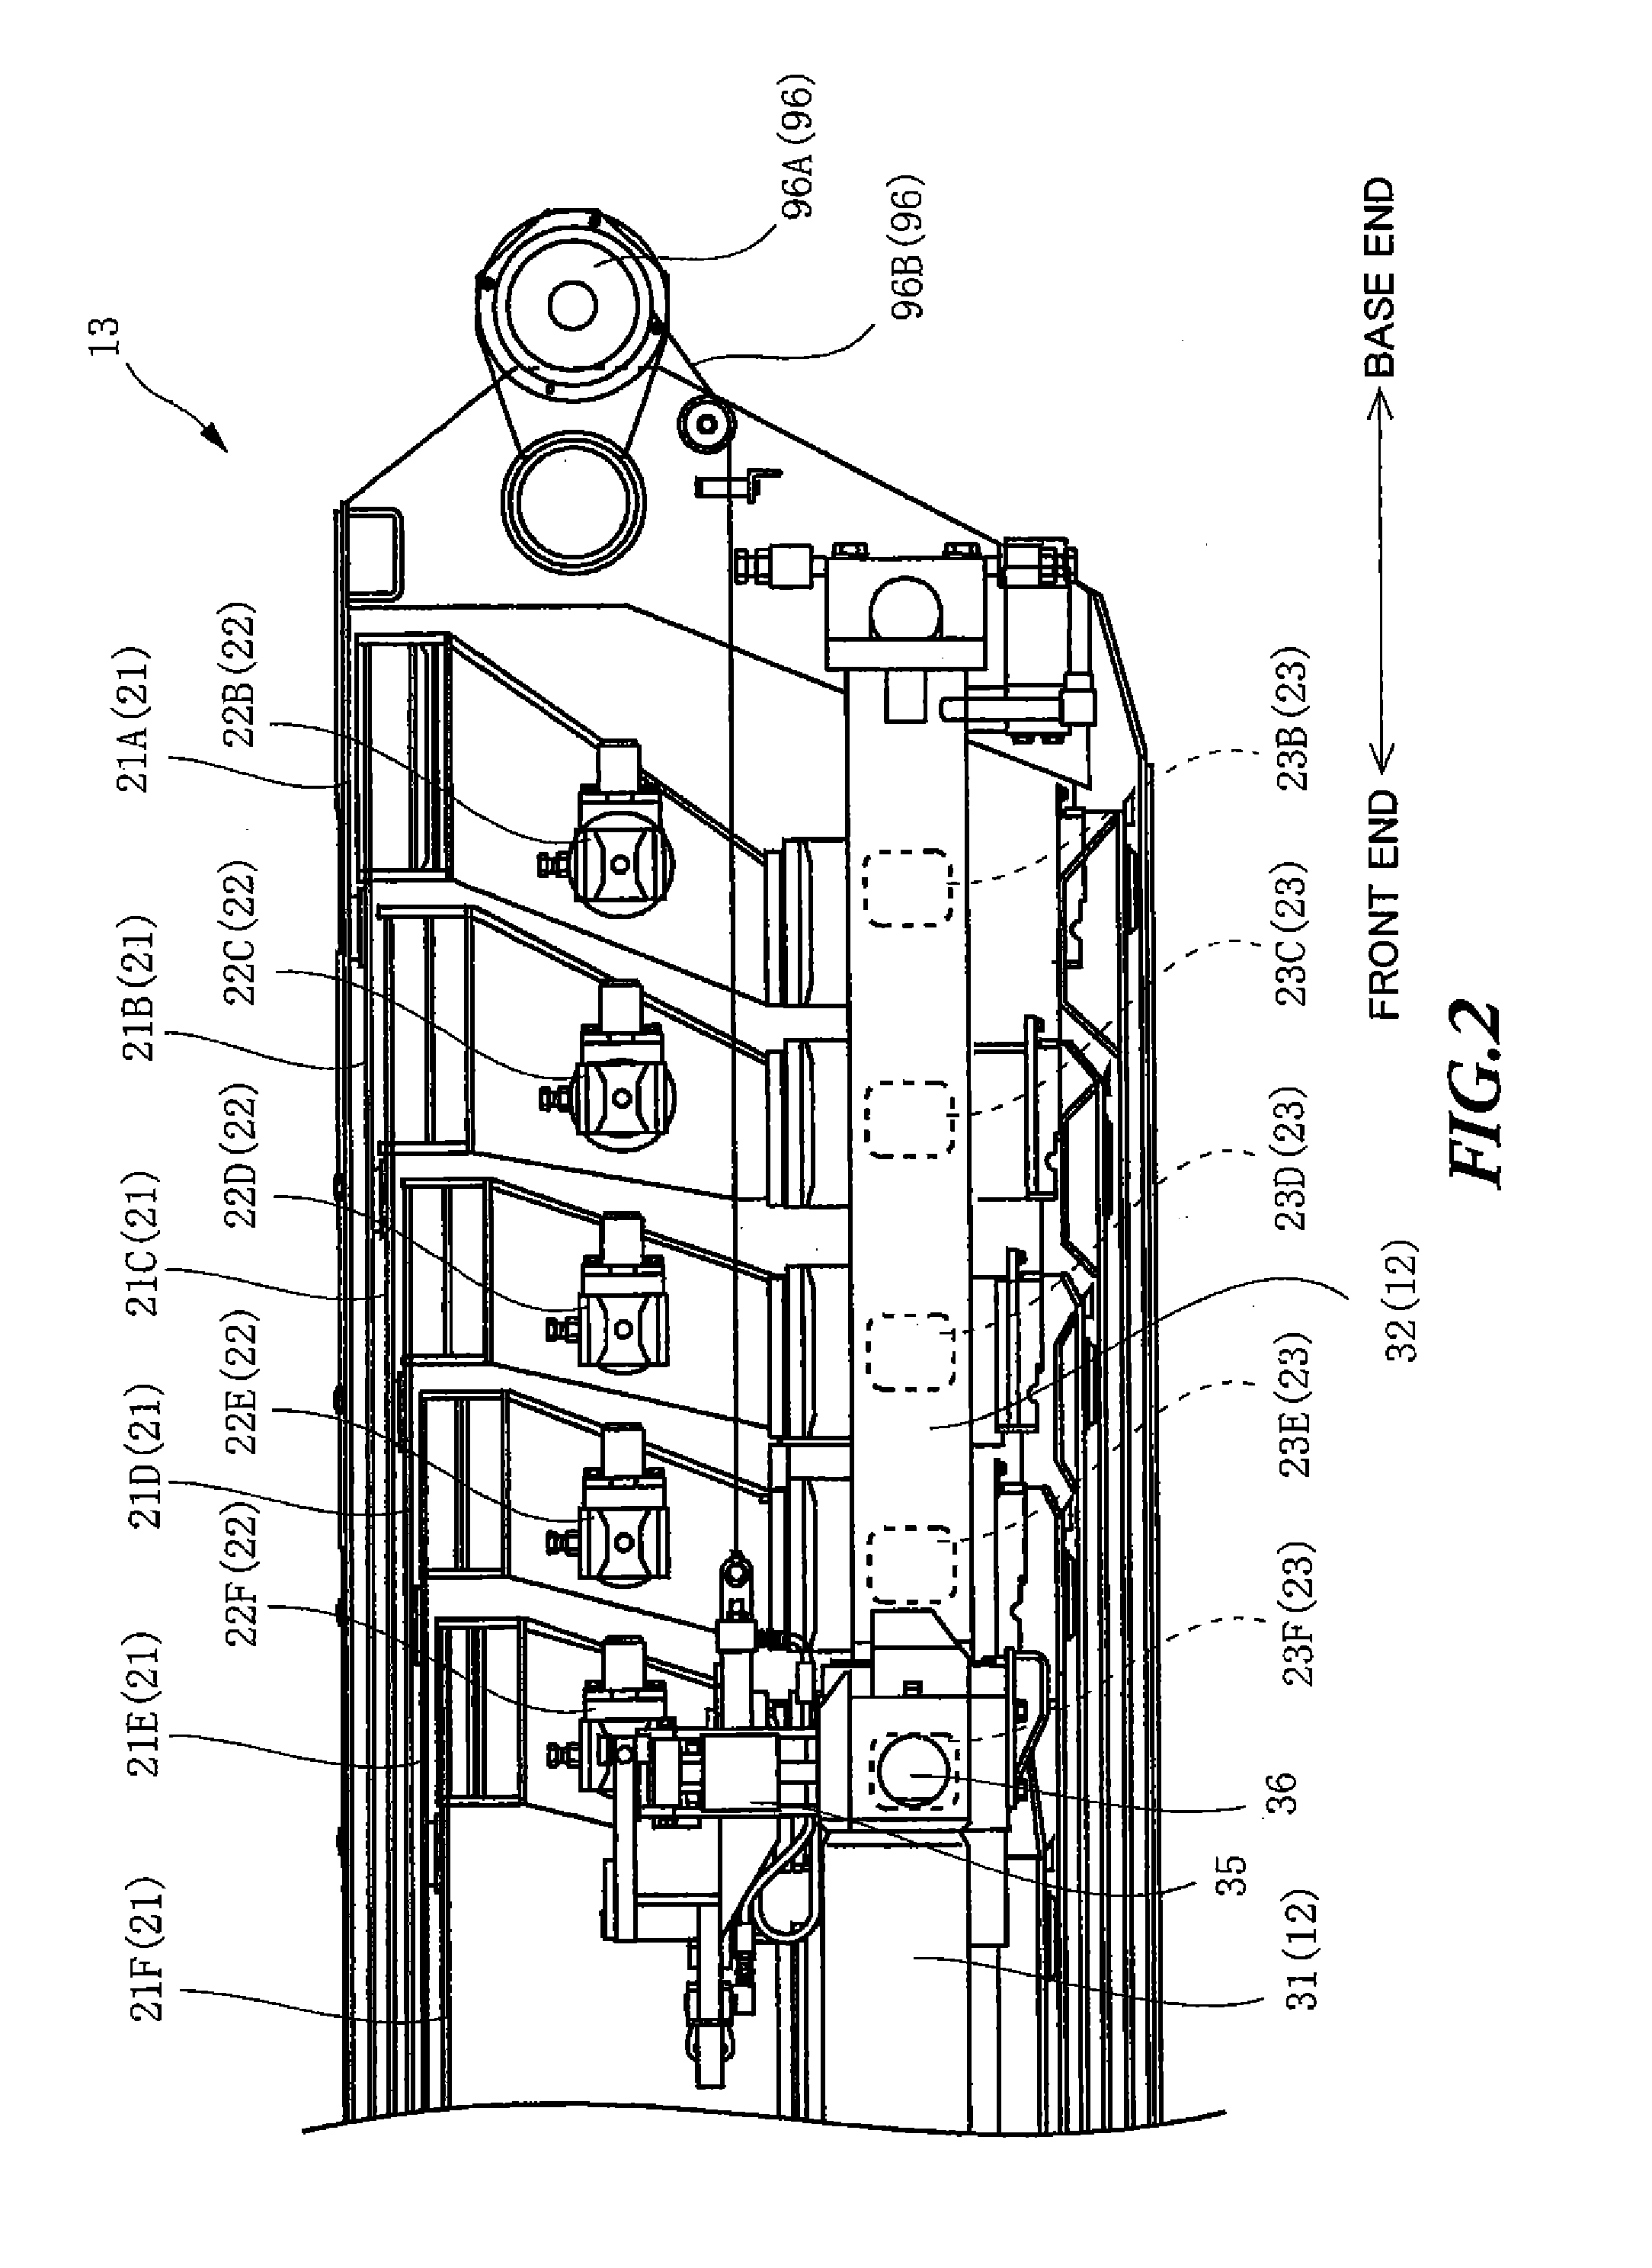 Boom extending and retracting apparatus of a crane